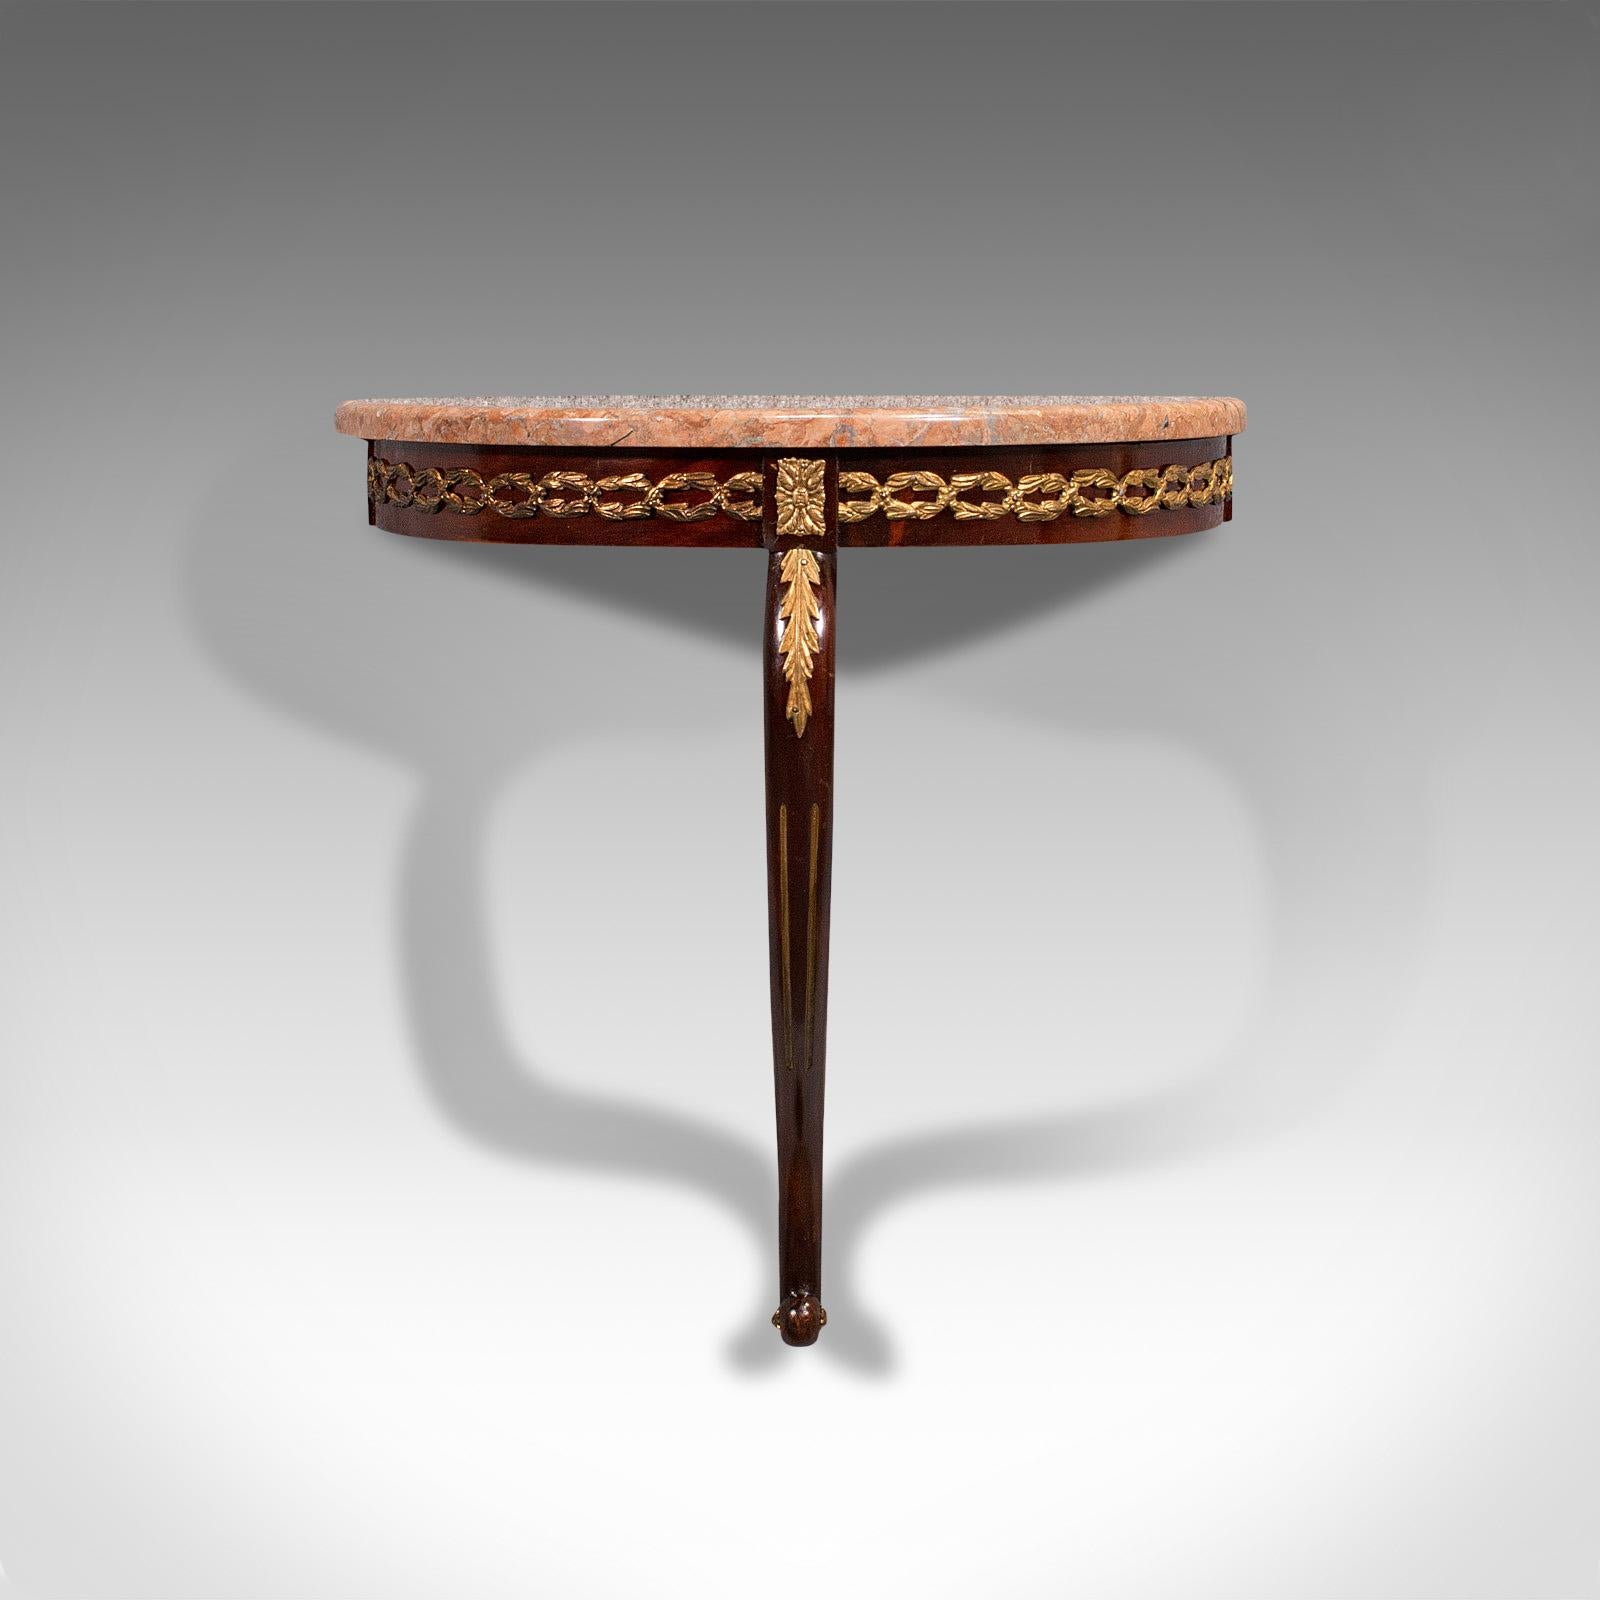 This is a vintage console table. A French, mahogany and marble wall table or candle shelf, dating to the late Art Deco period, circa 1940.

Art Deco taste and sinuous forms combine for this distinctive table
Displaying a desirable aged patina